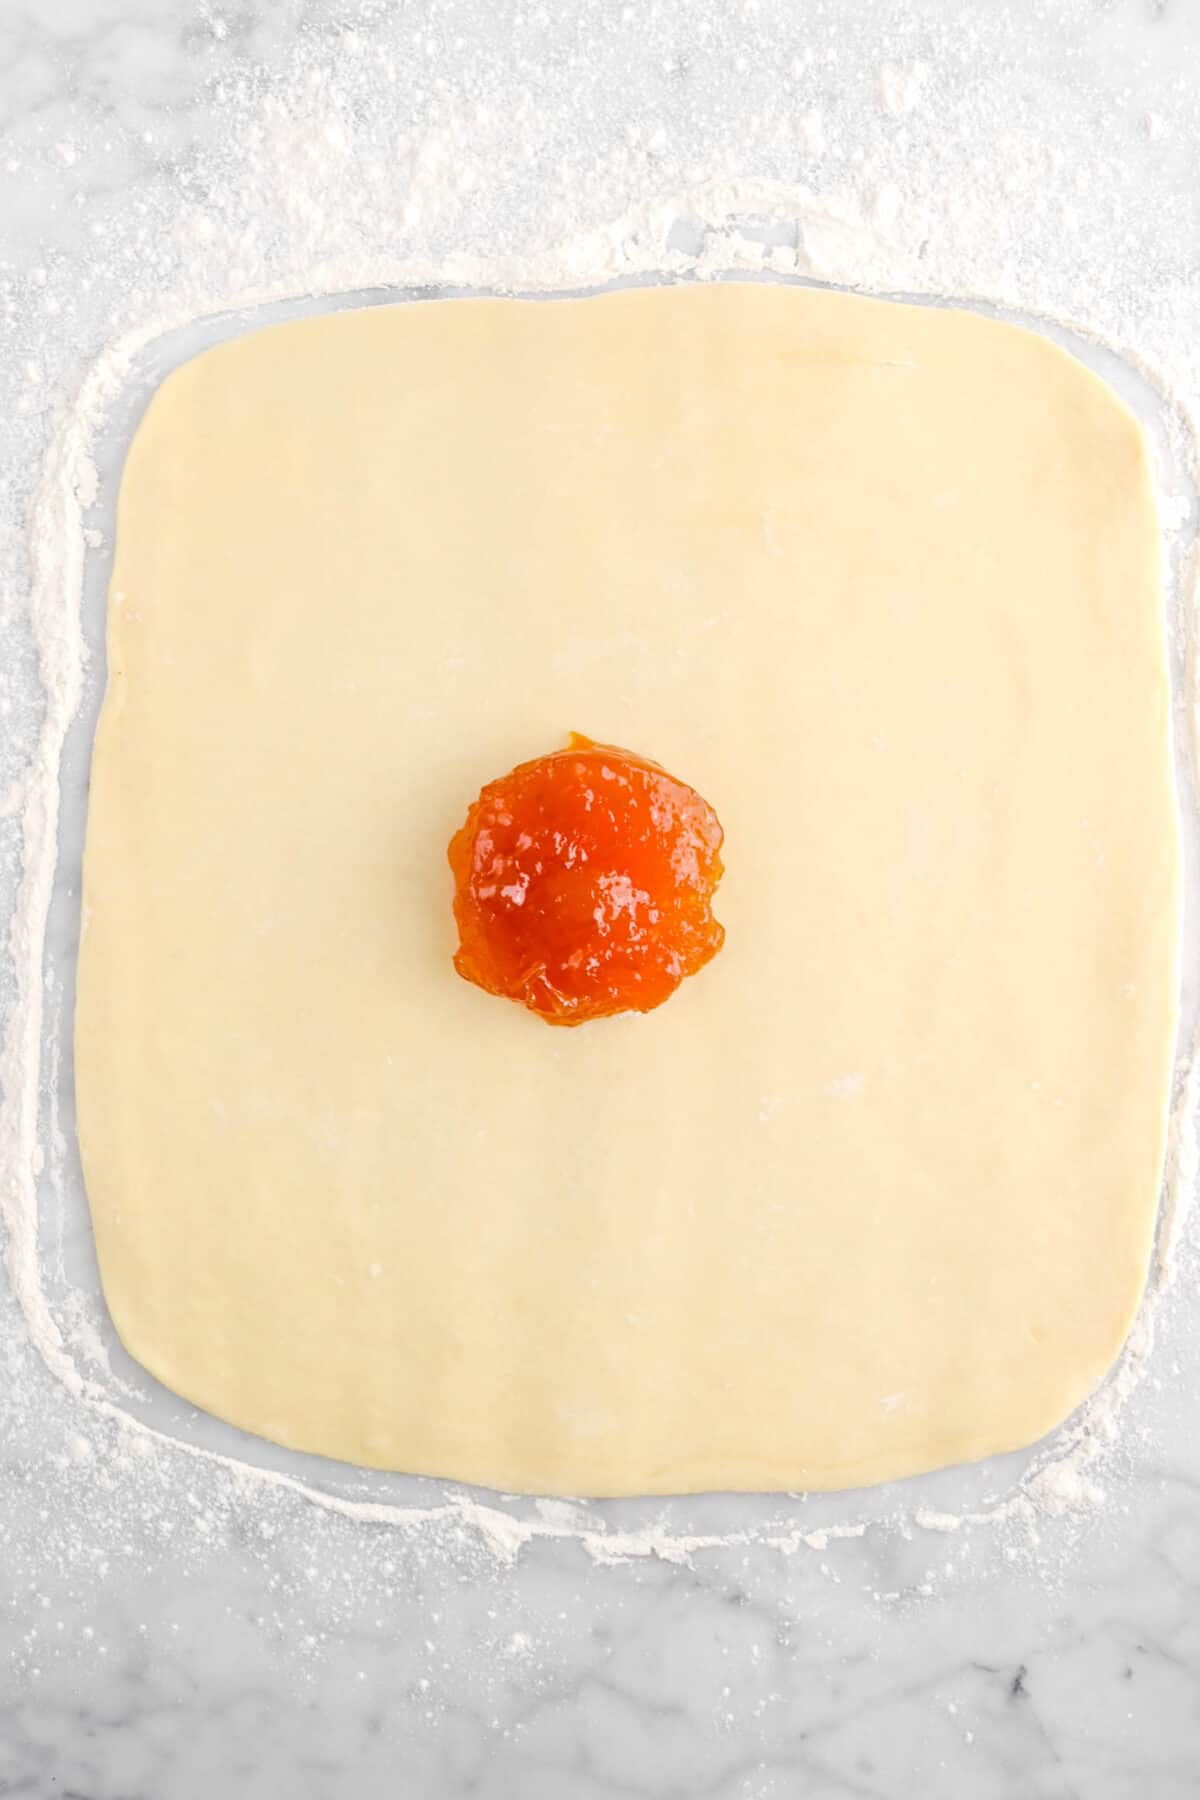 apricot jam added on top of dough